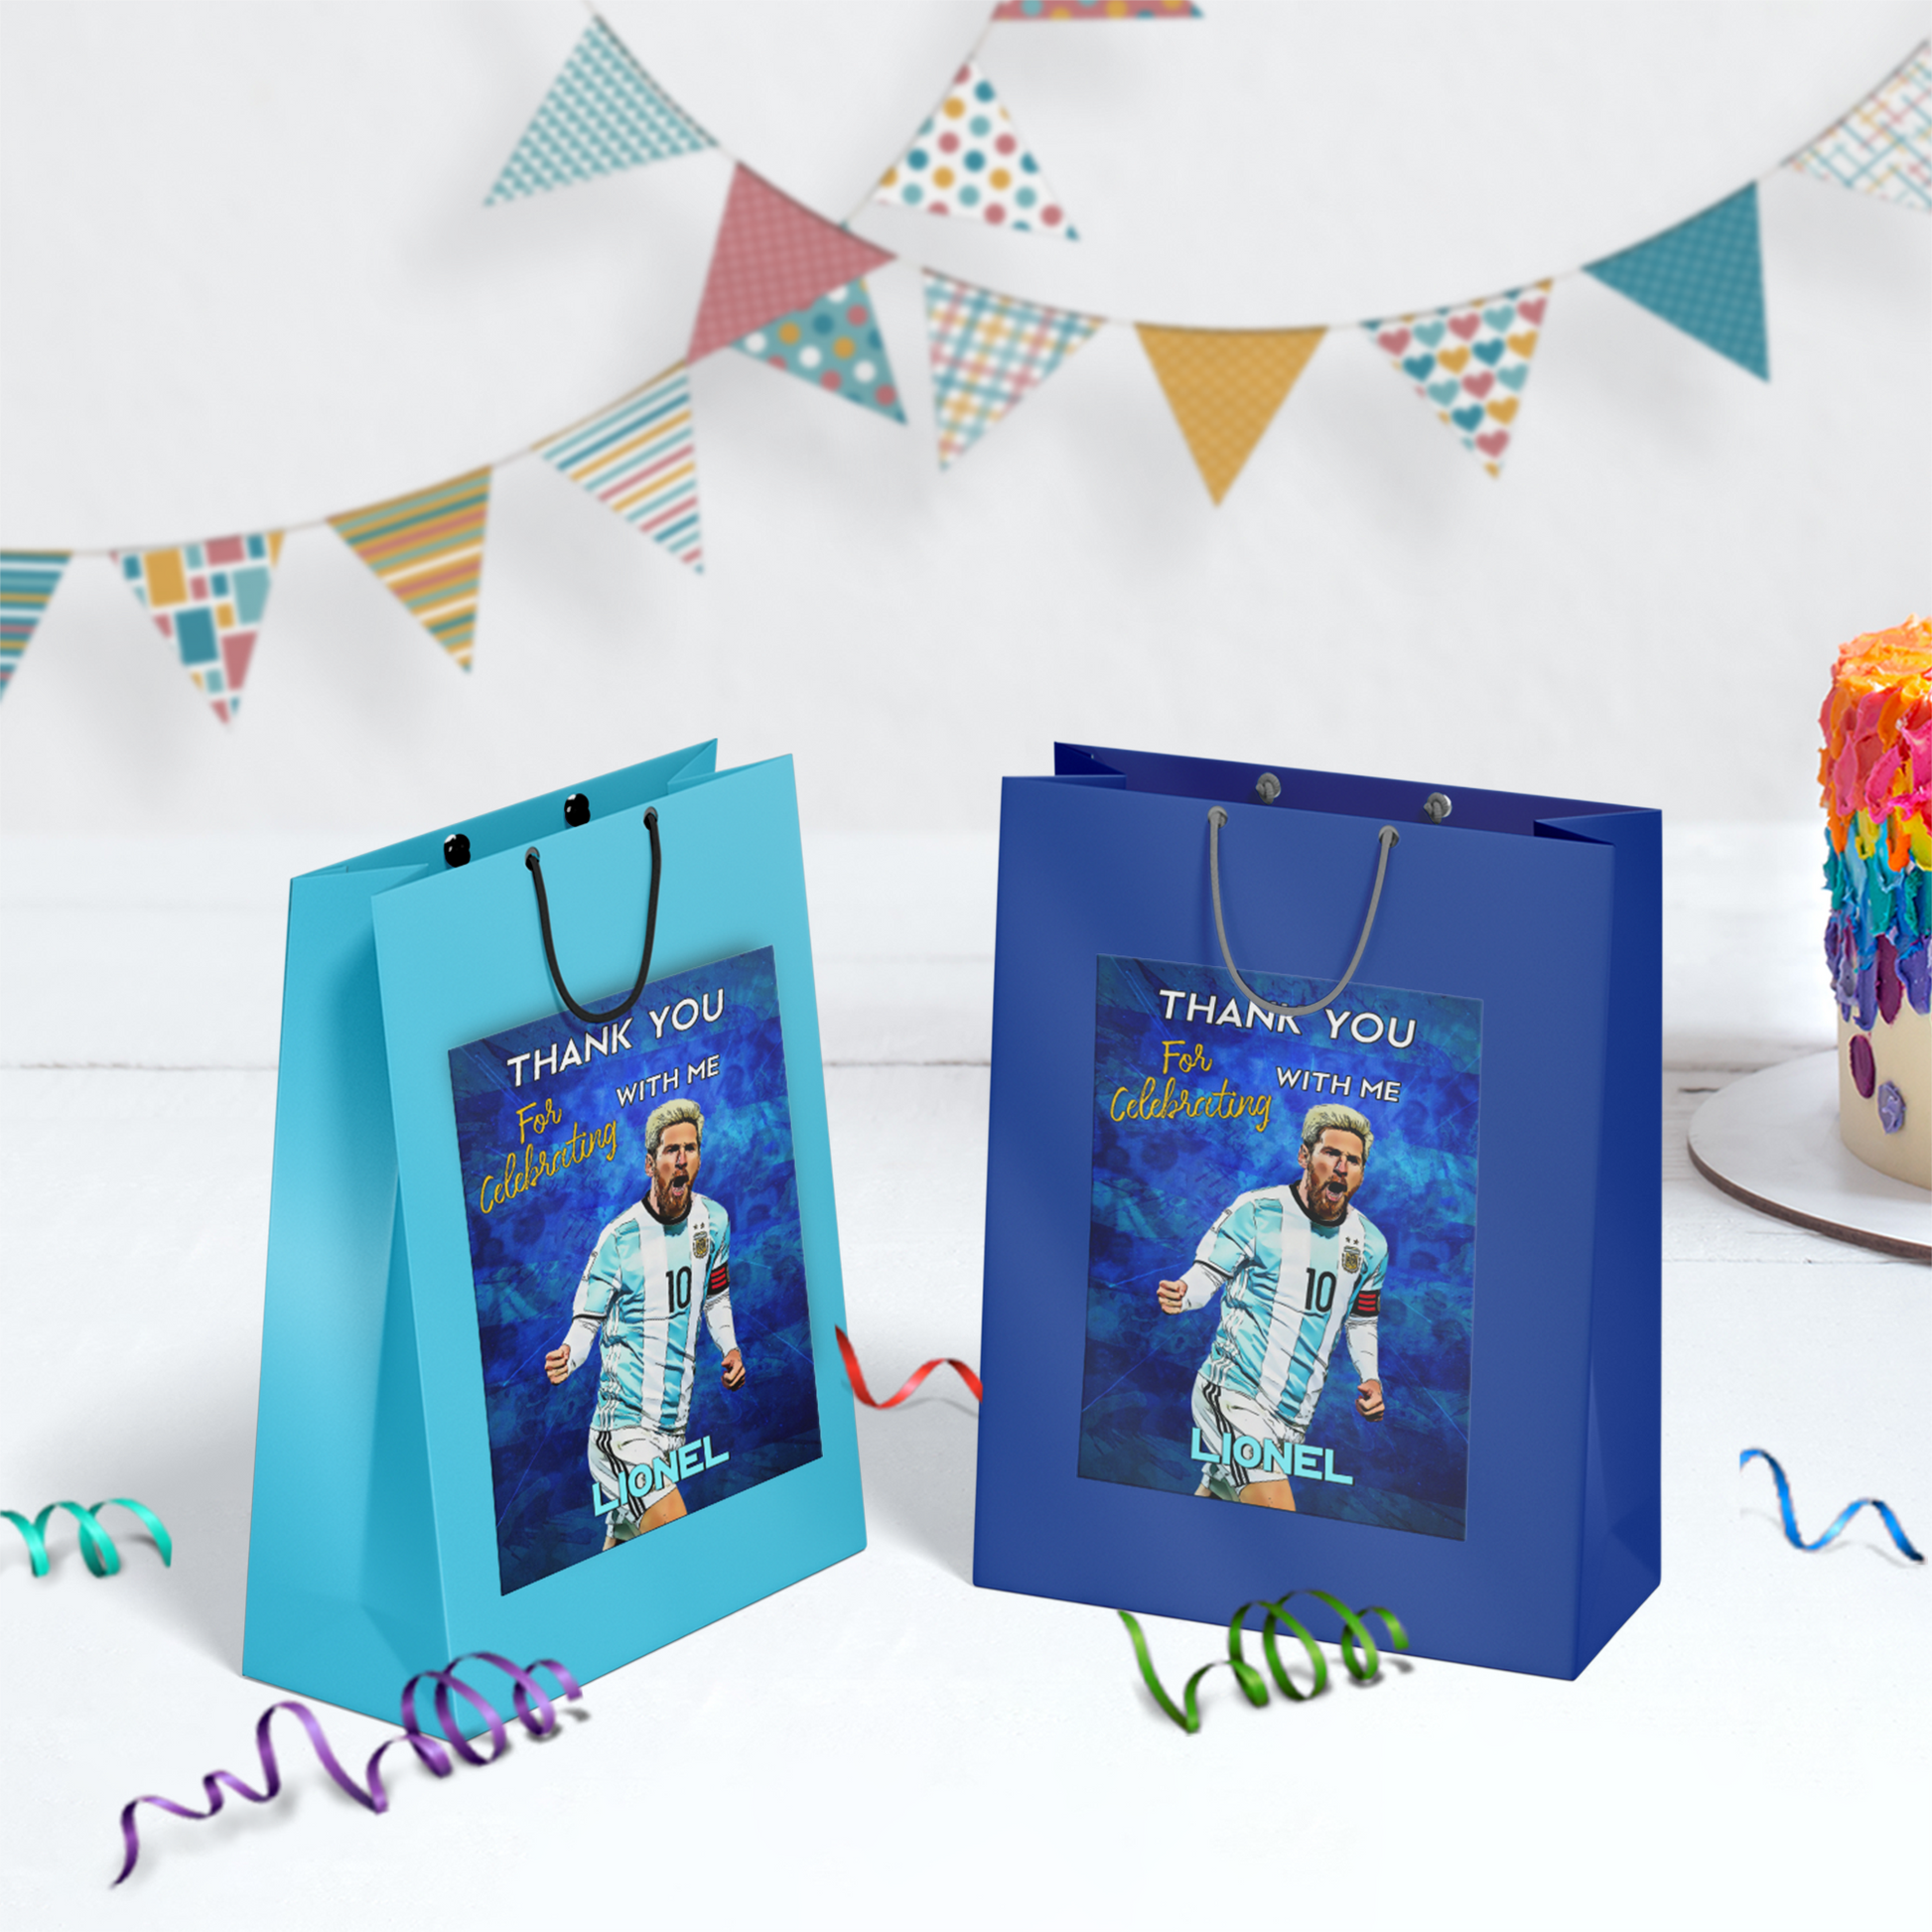 Gift bag label with Lionel Messi theme